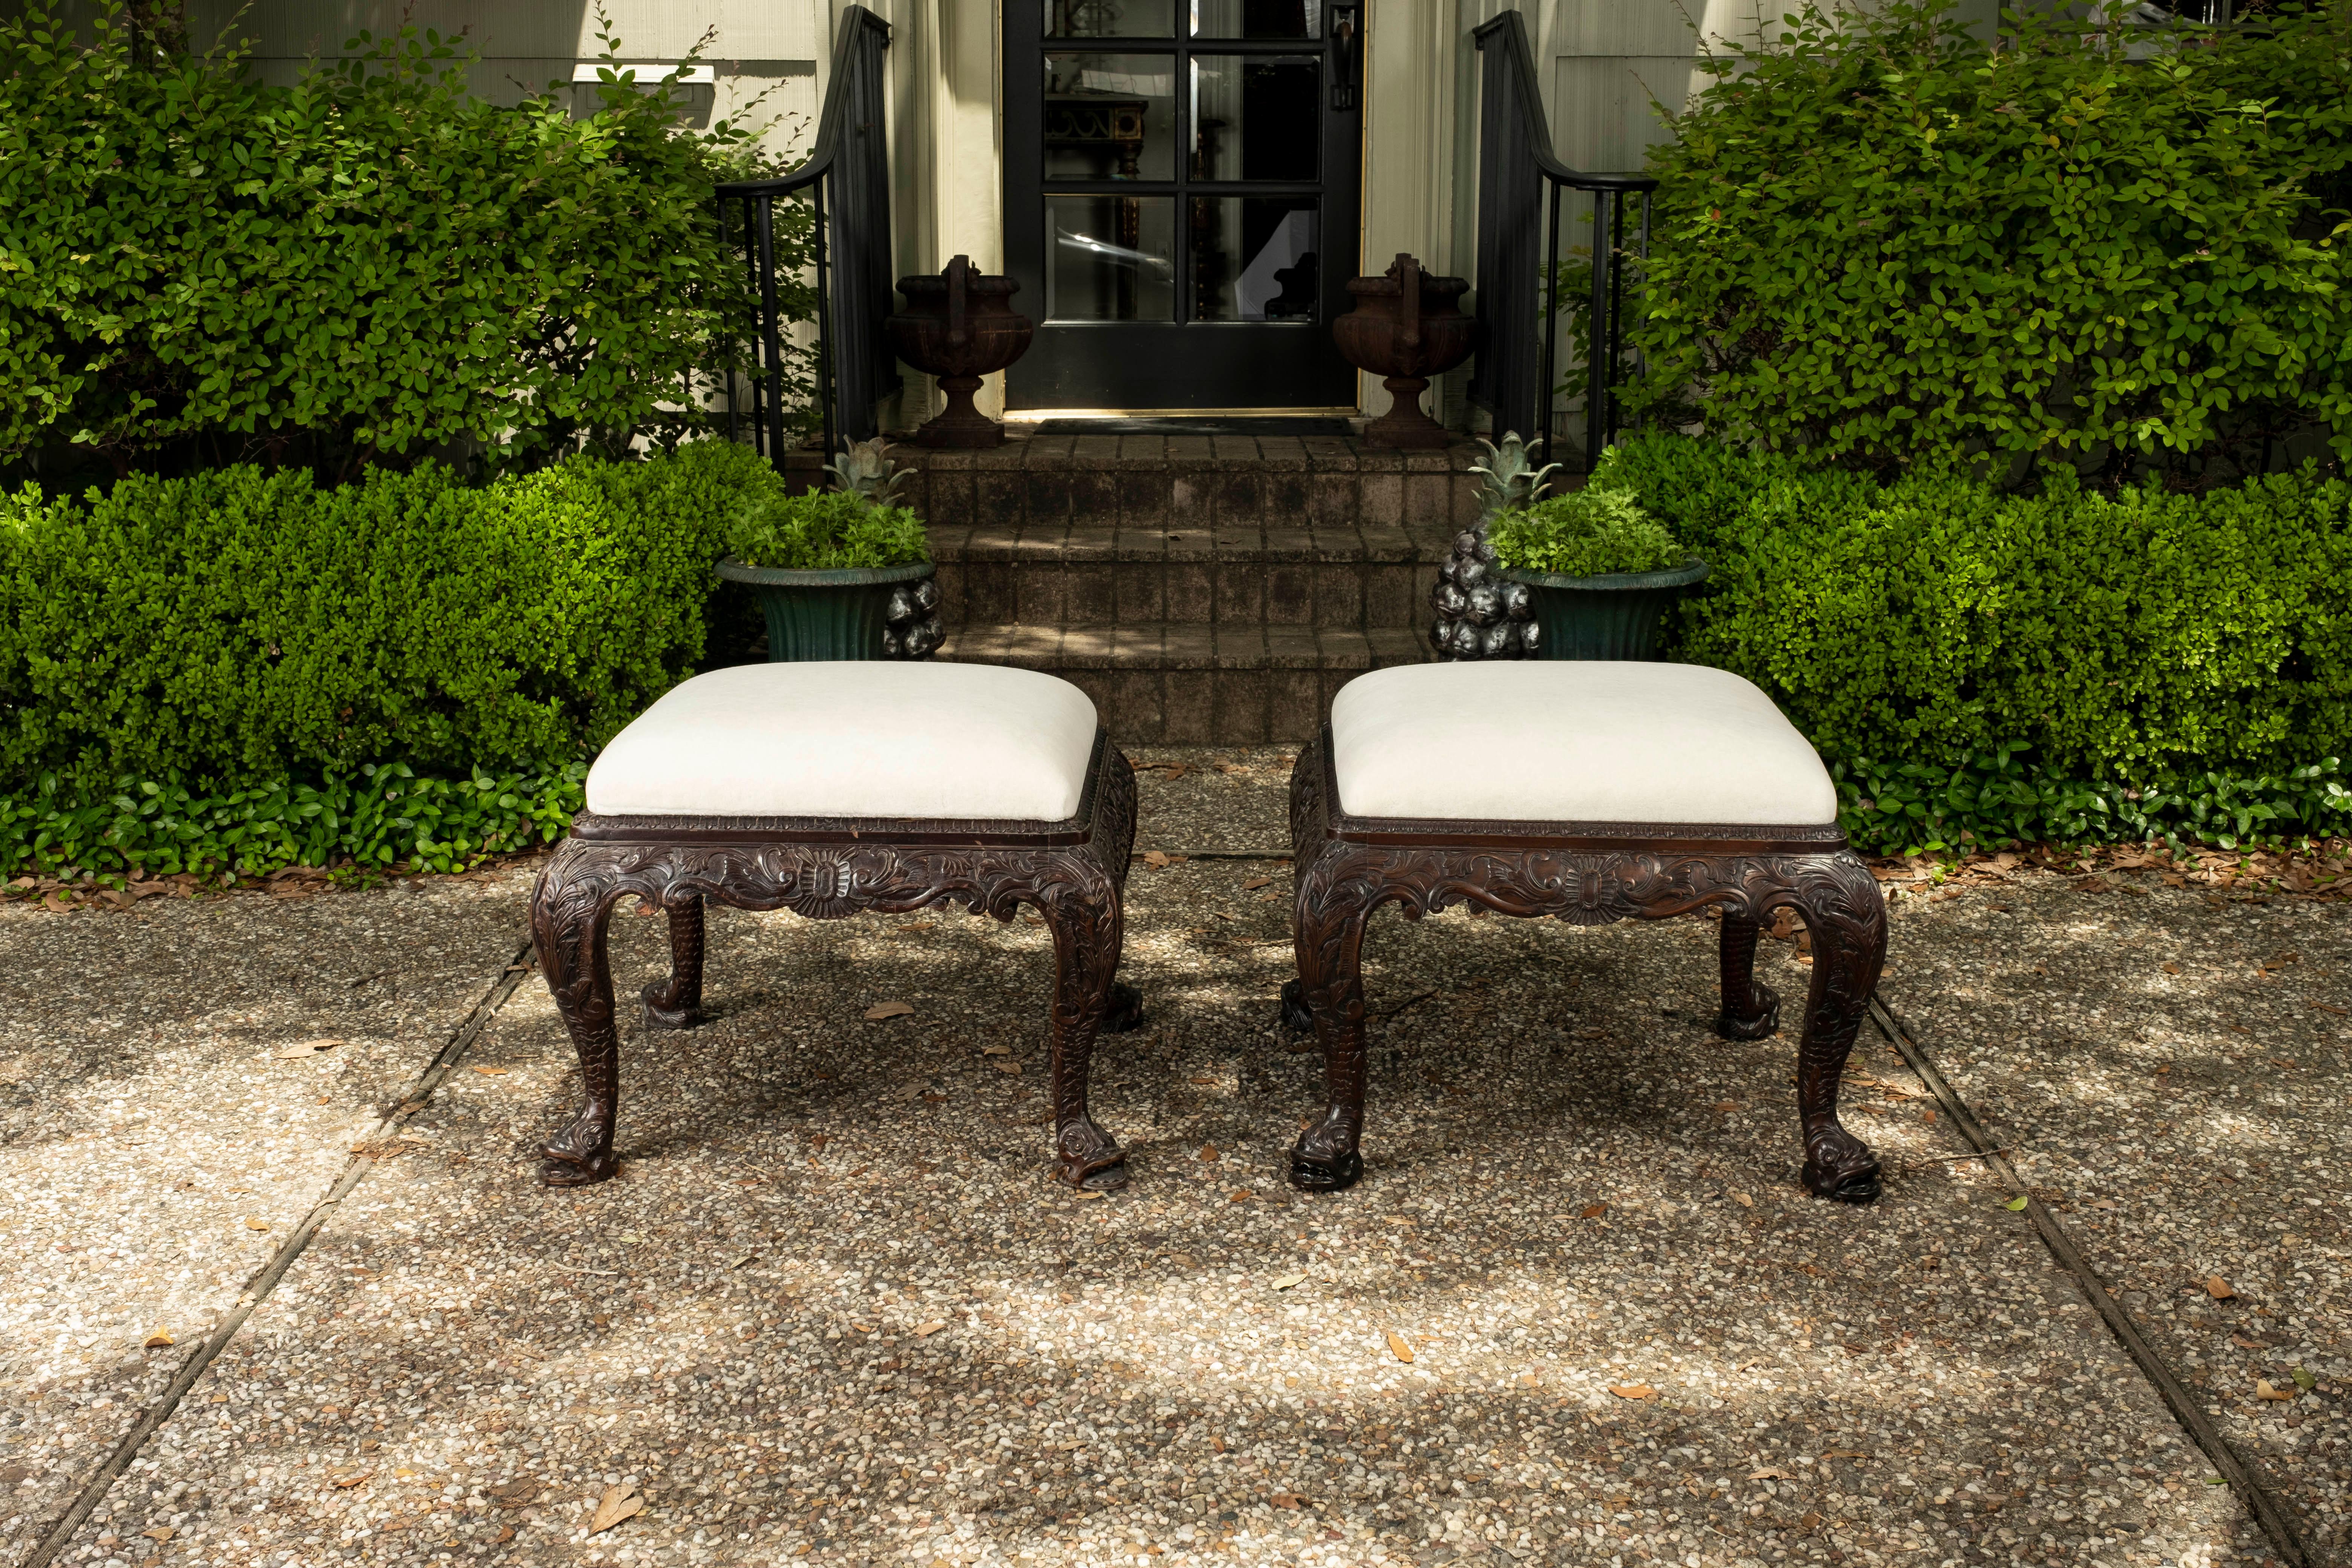 Pair of antique Regency style ottomans or benches. These stunning large English Regency style benches or ottomans are beautifully carved on all sides with lovely dolphin feet. This pair is large enough for extra seating where needed. This pair has